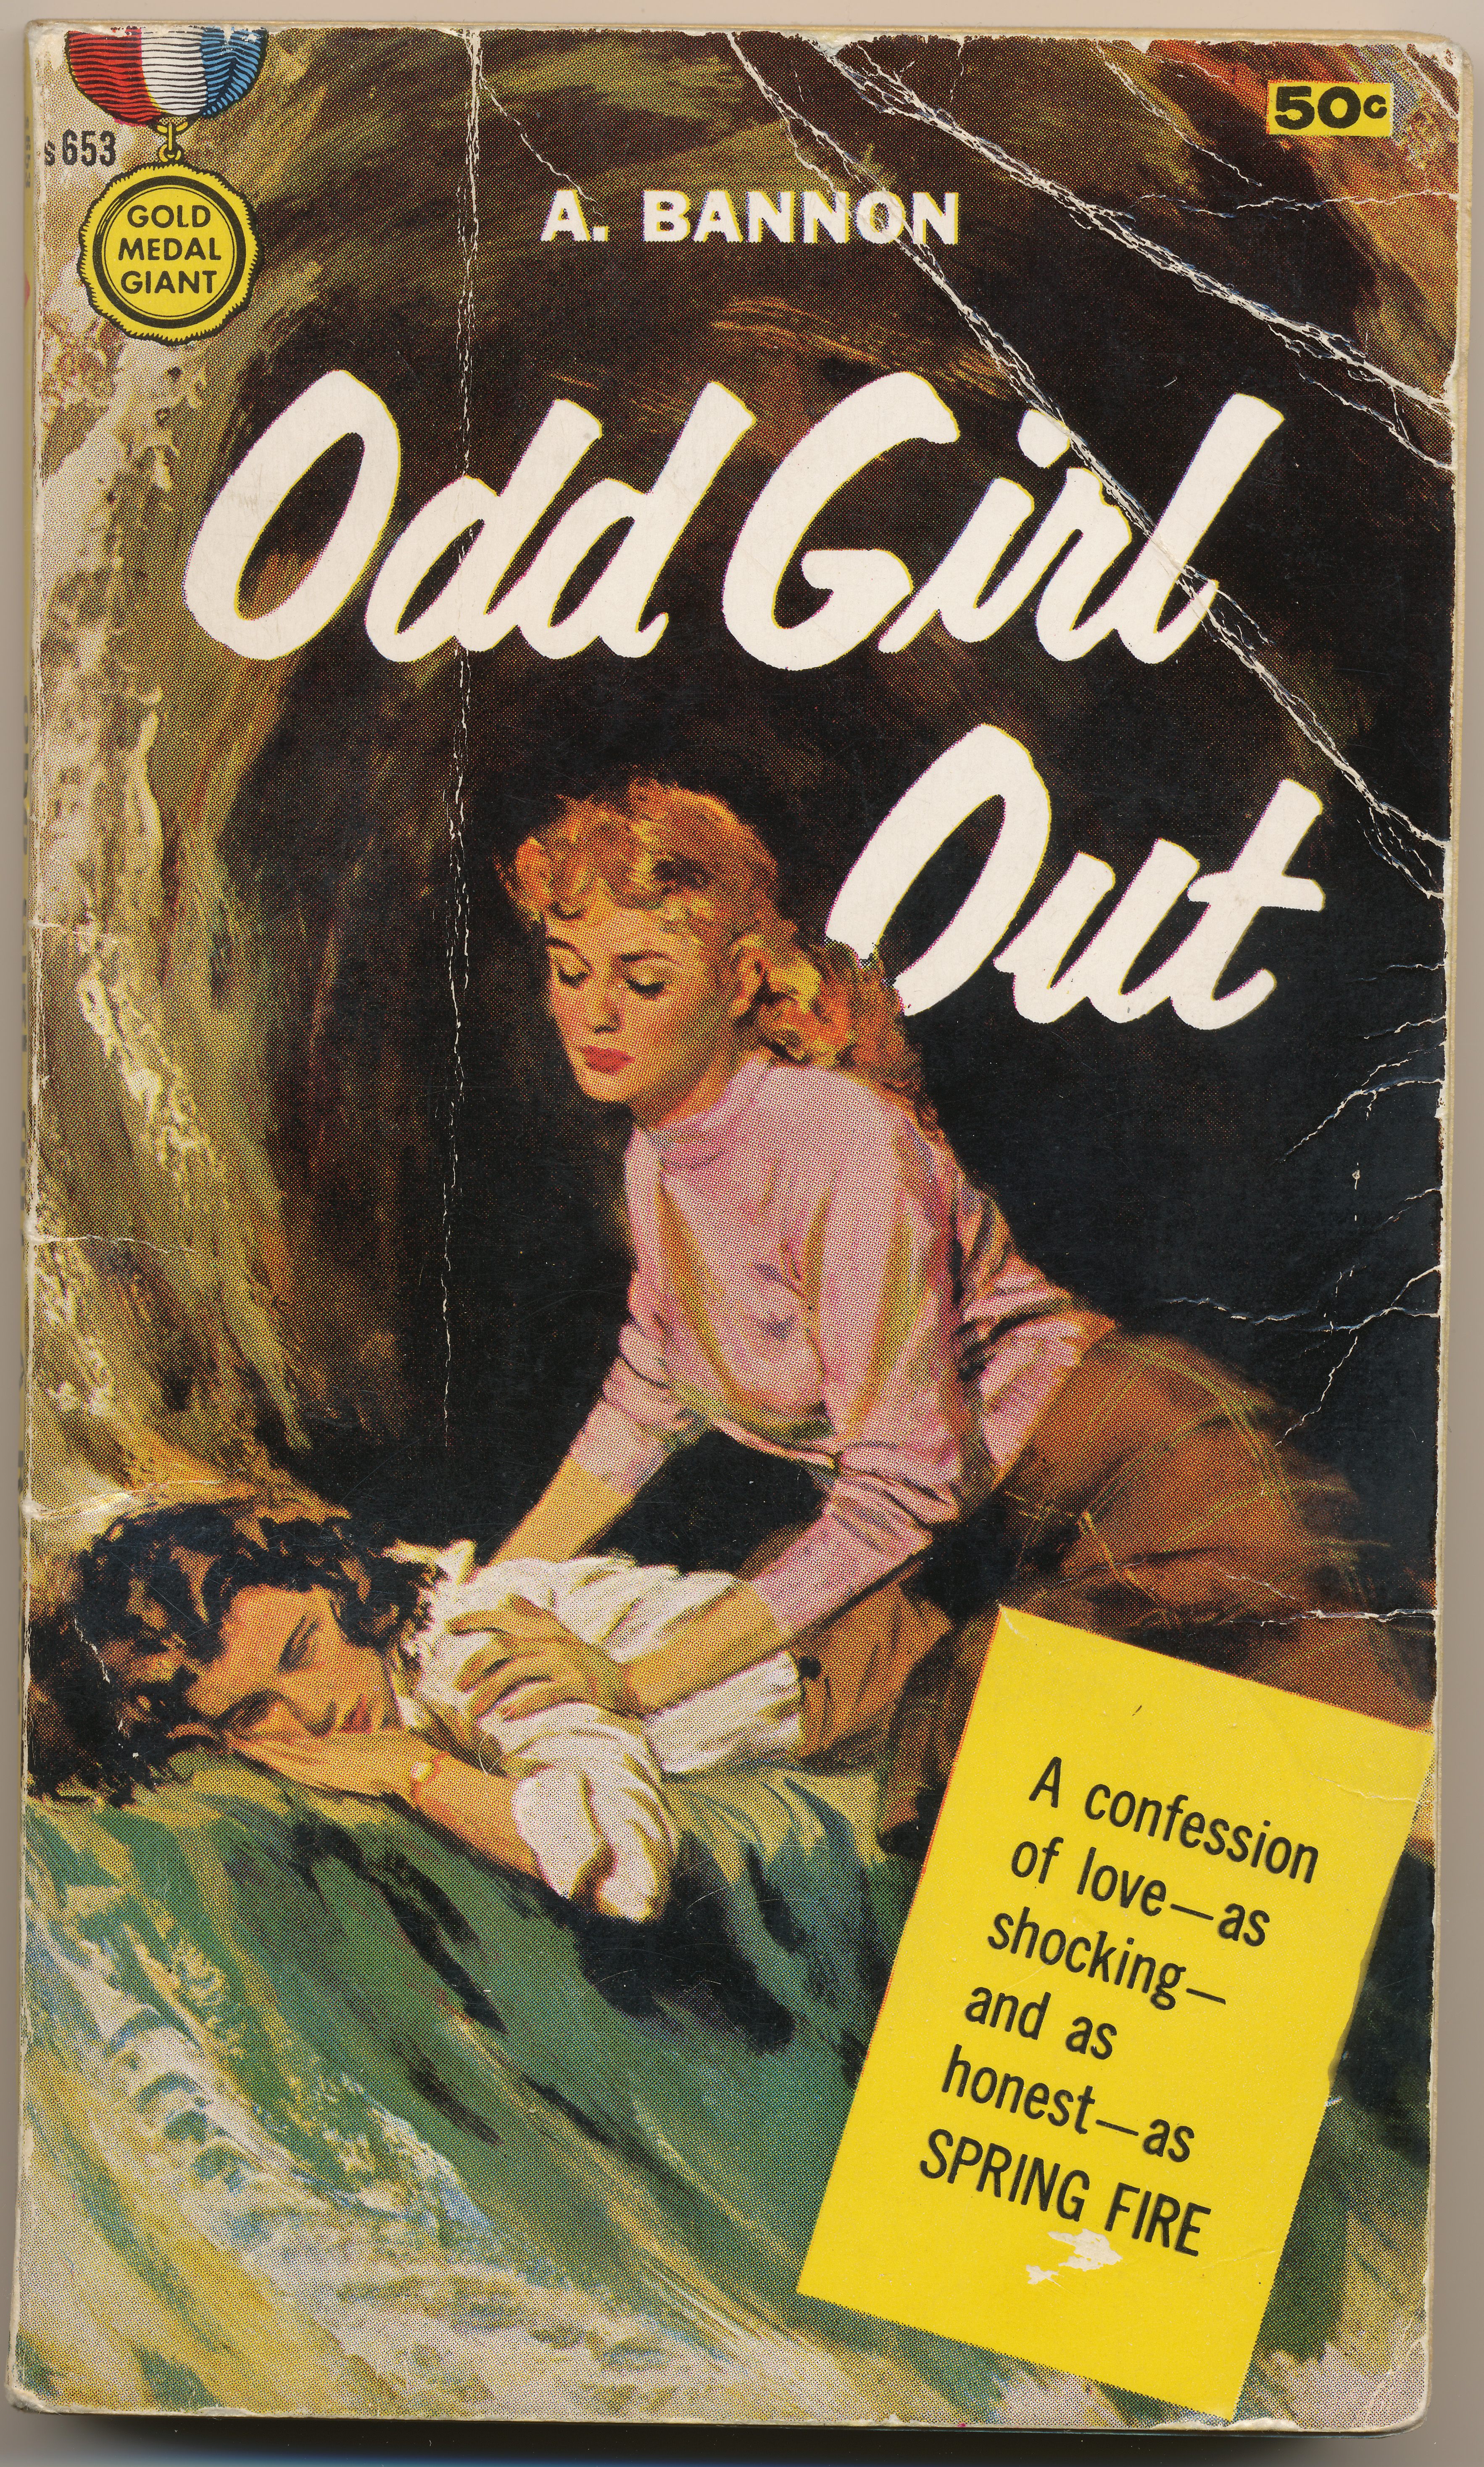 The Lesbian Pulp Fiction That Saved Lives image